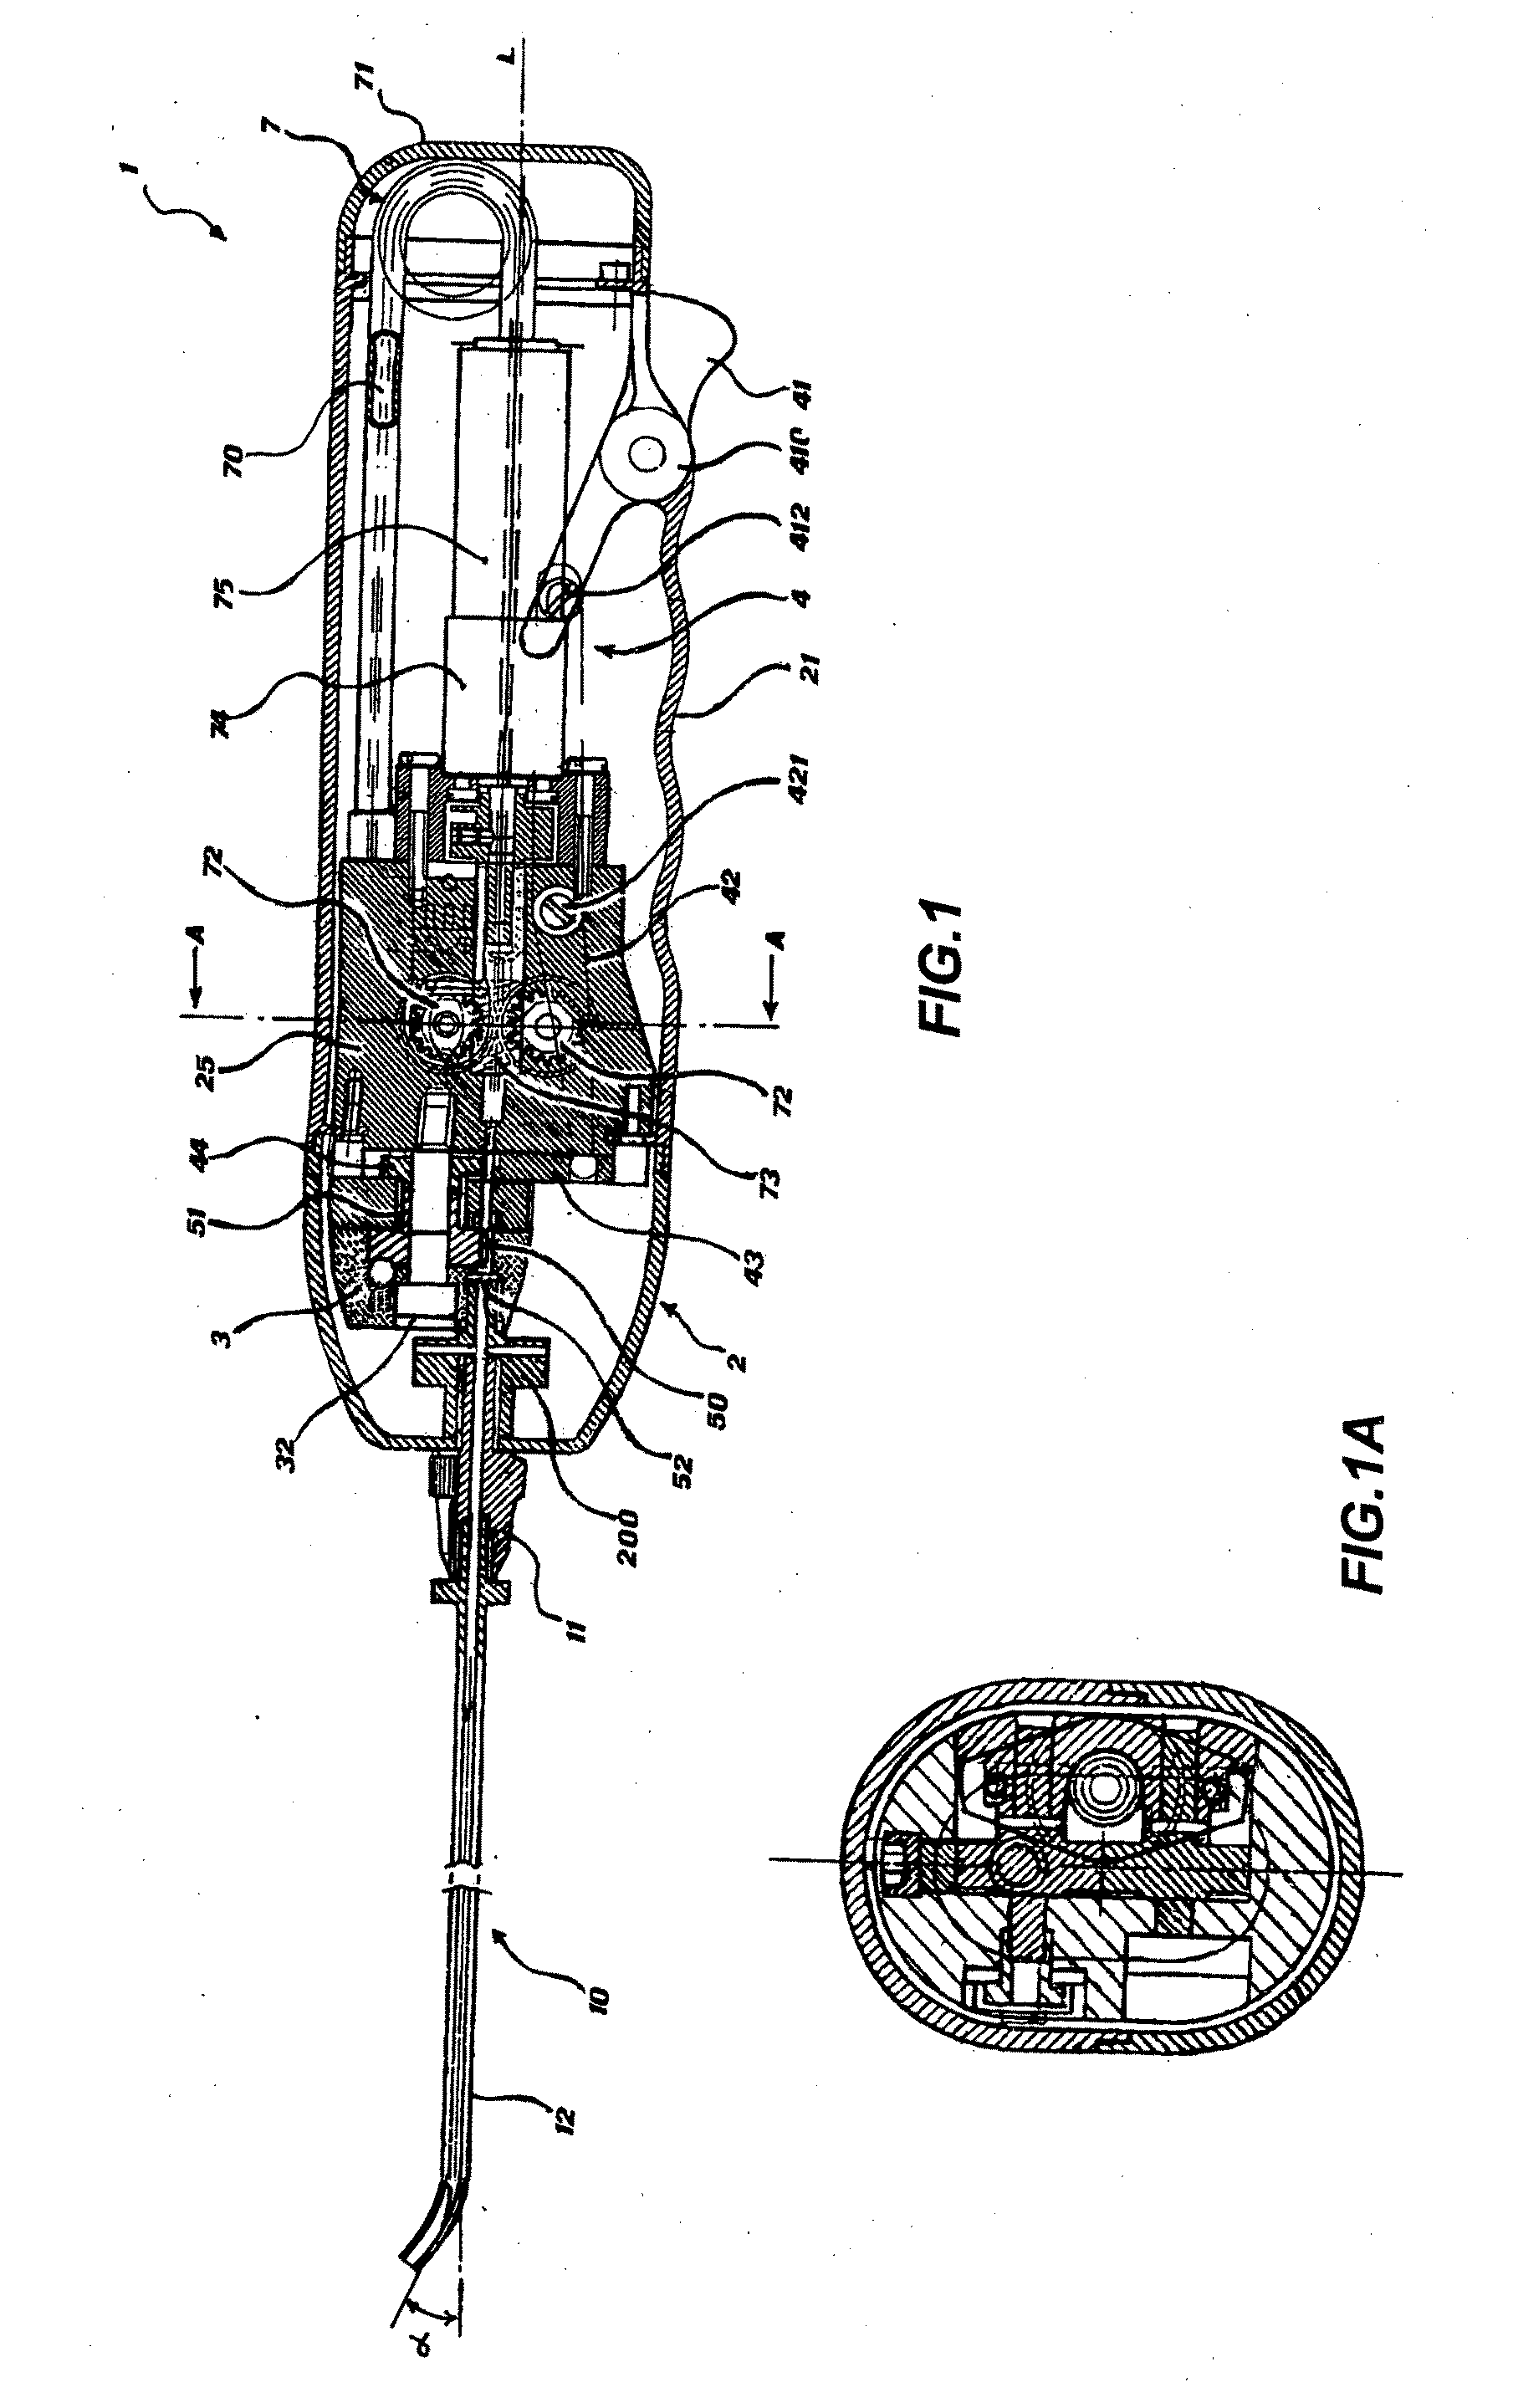 Device for percutaneous interstitial brachytherapy